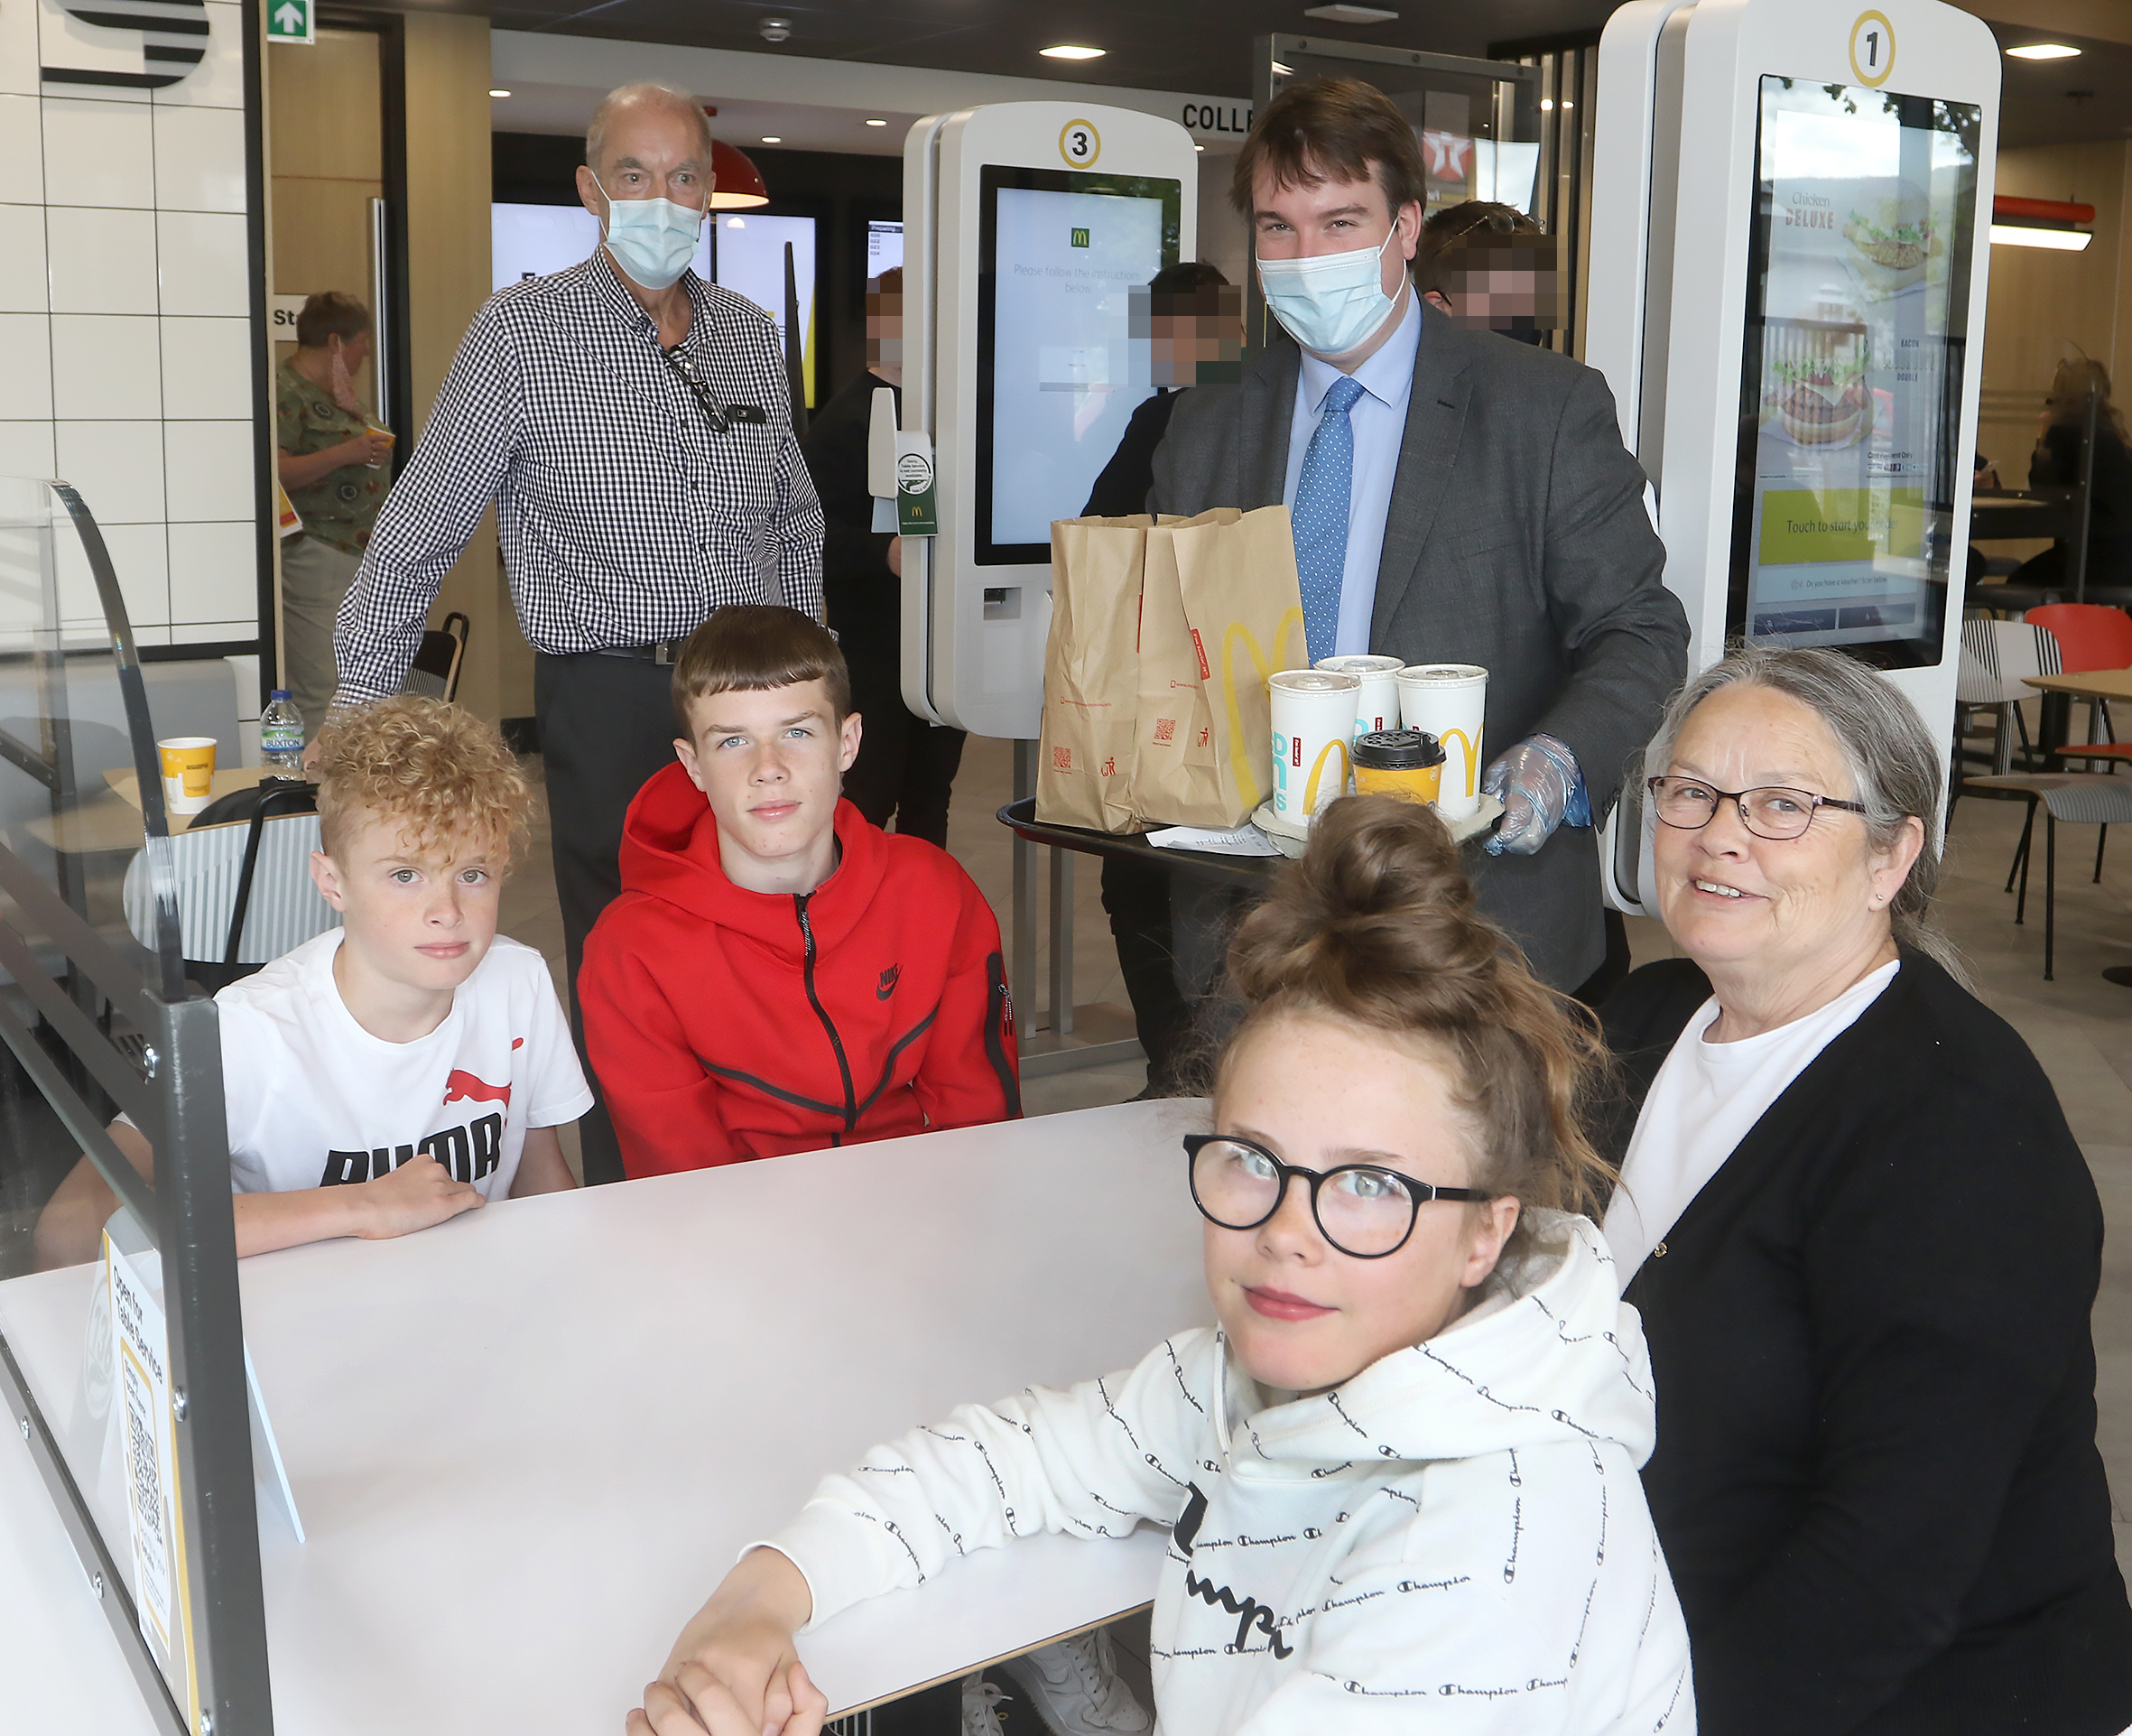 Official opening of the new McDonalds in Welshpool by Montgomeryshire MP Craig Williams and Franchisee Bob Beckett. Pictured is Craig Williams serving the 1st customers, Kathleen Comaskey and her step-grandchildren, Jacob, Rian and Liv from